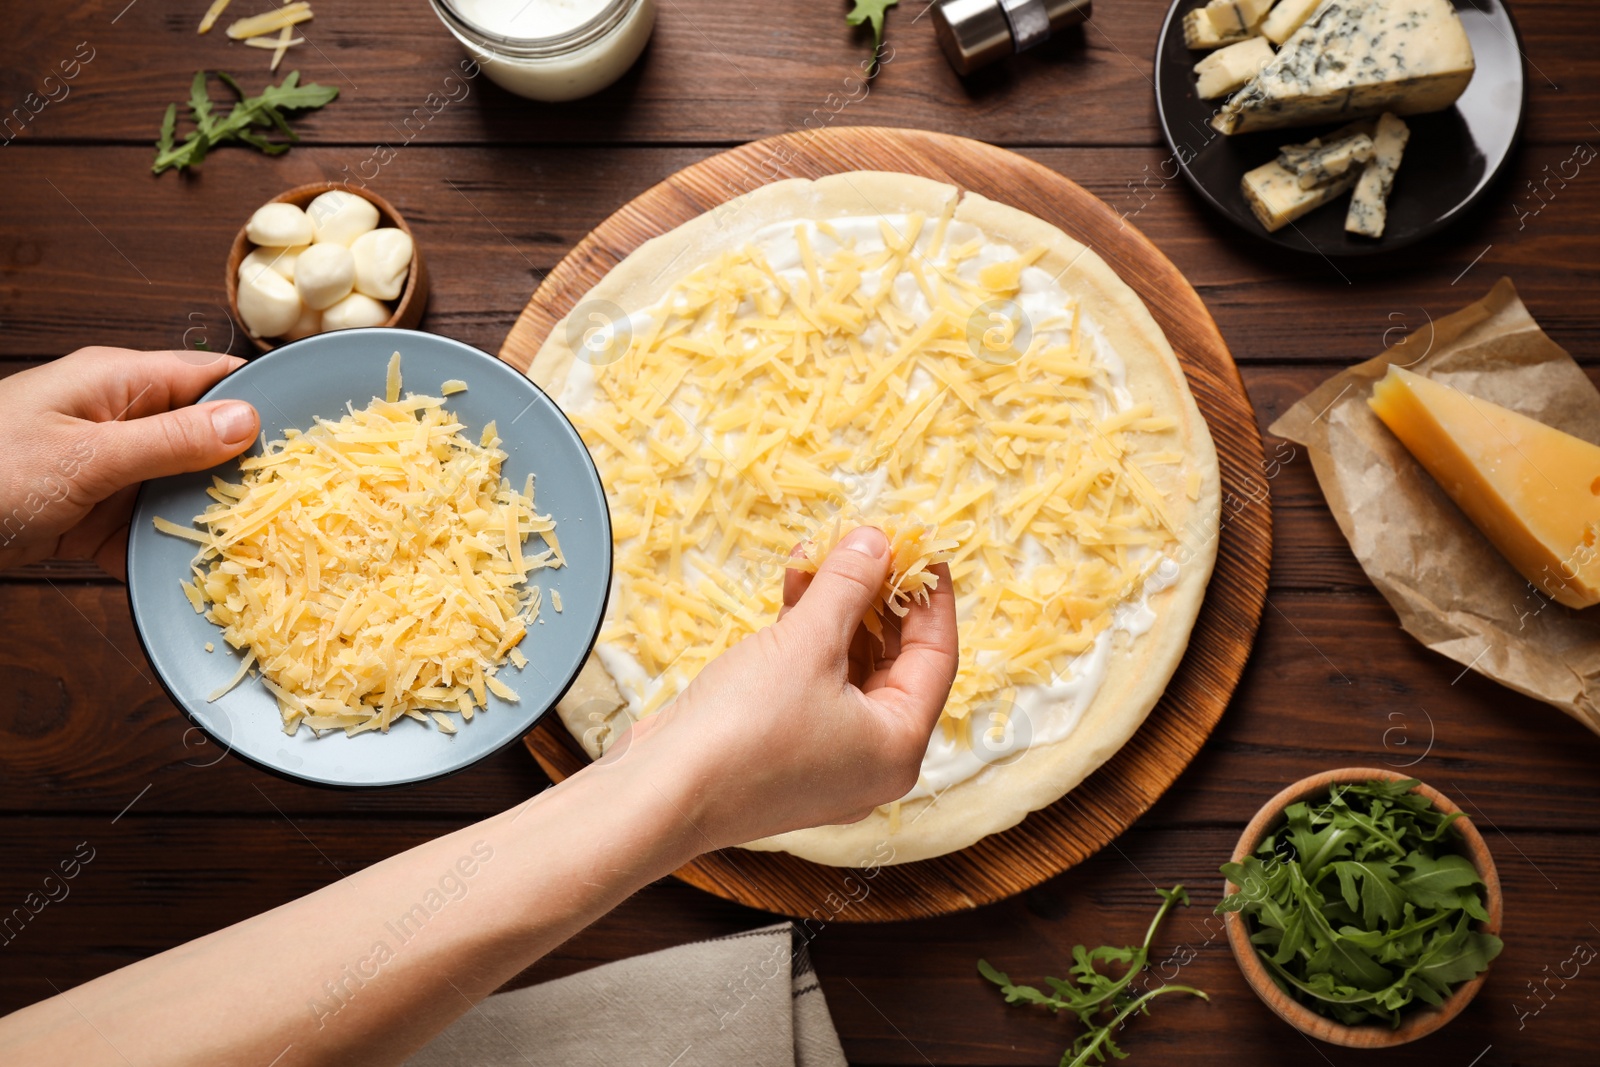 Photo of Woman adding grated cheese to unbaked pizza on wooden table, top view